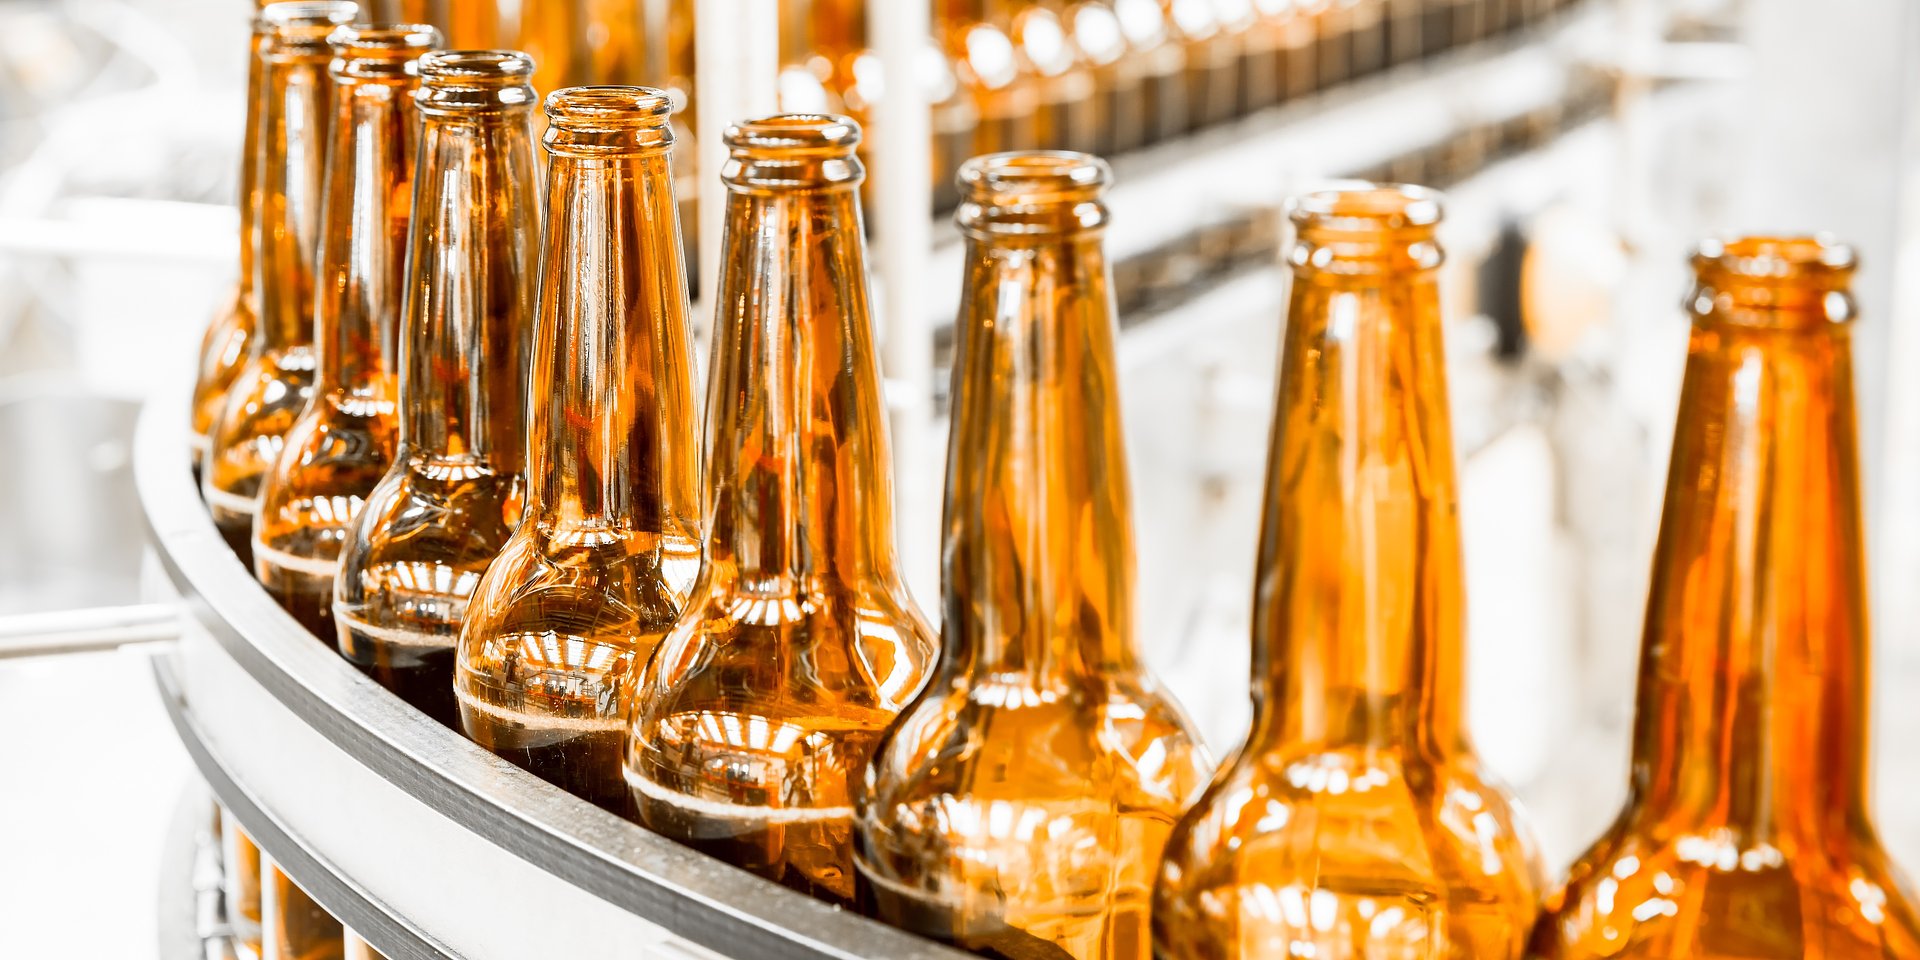 Beer Canada applauds Government of Ontario’s decision to freeze the Ontario Beer Basic Tax